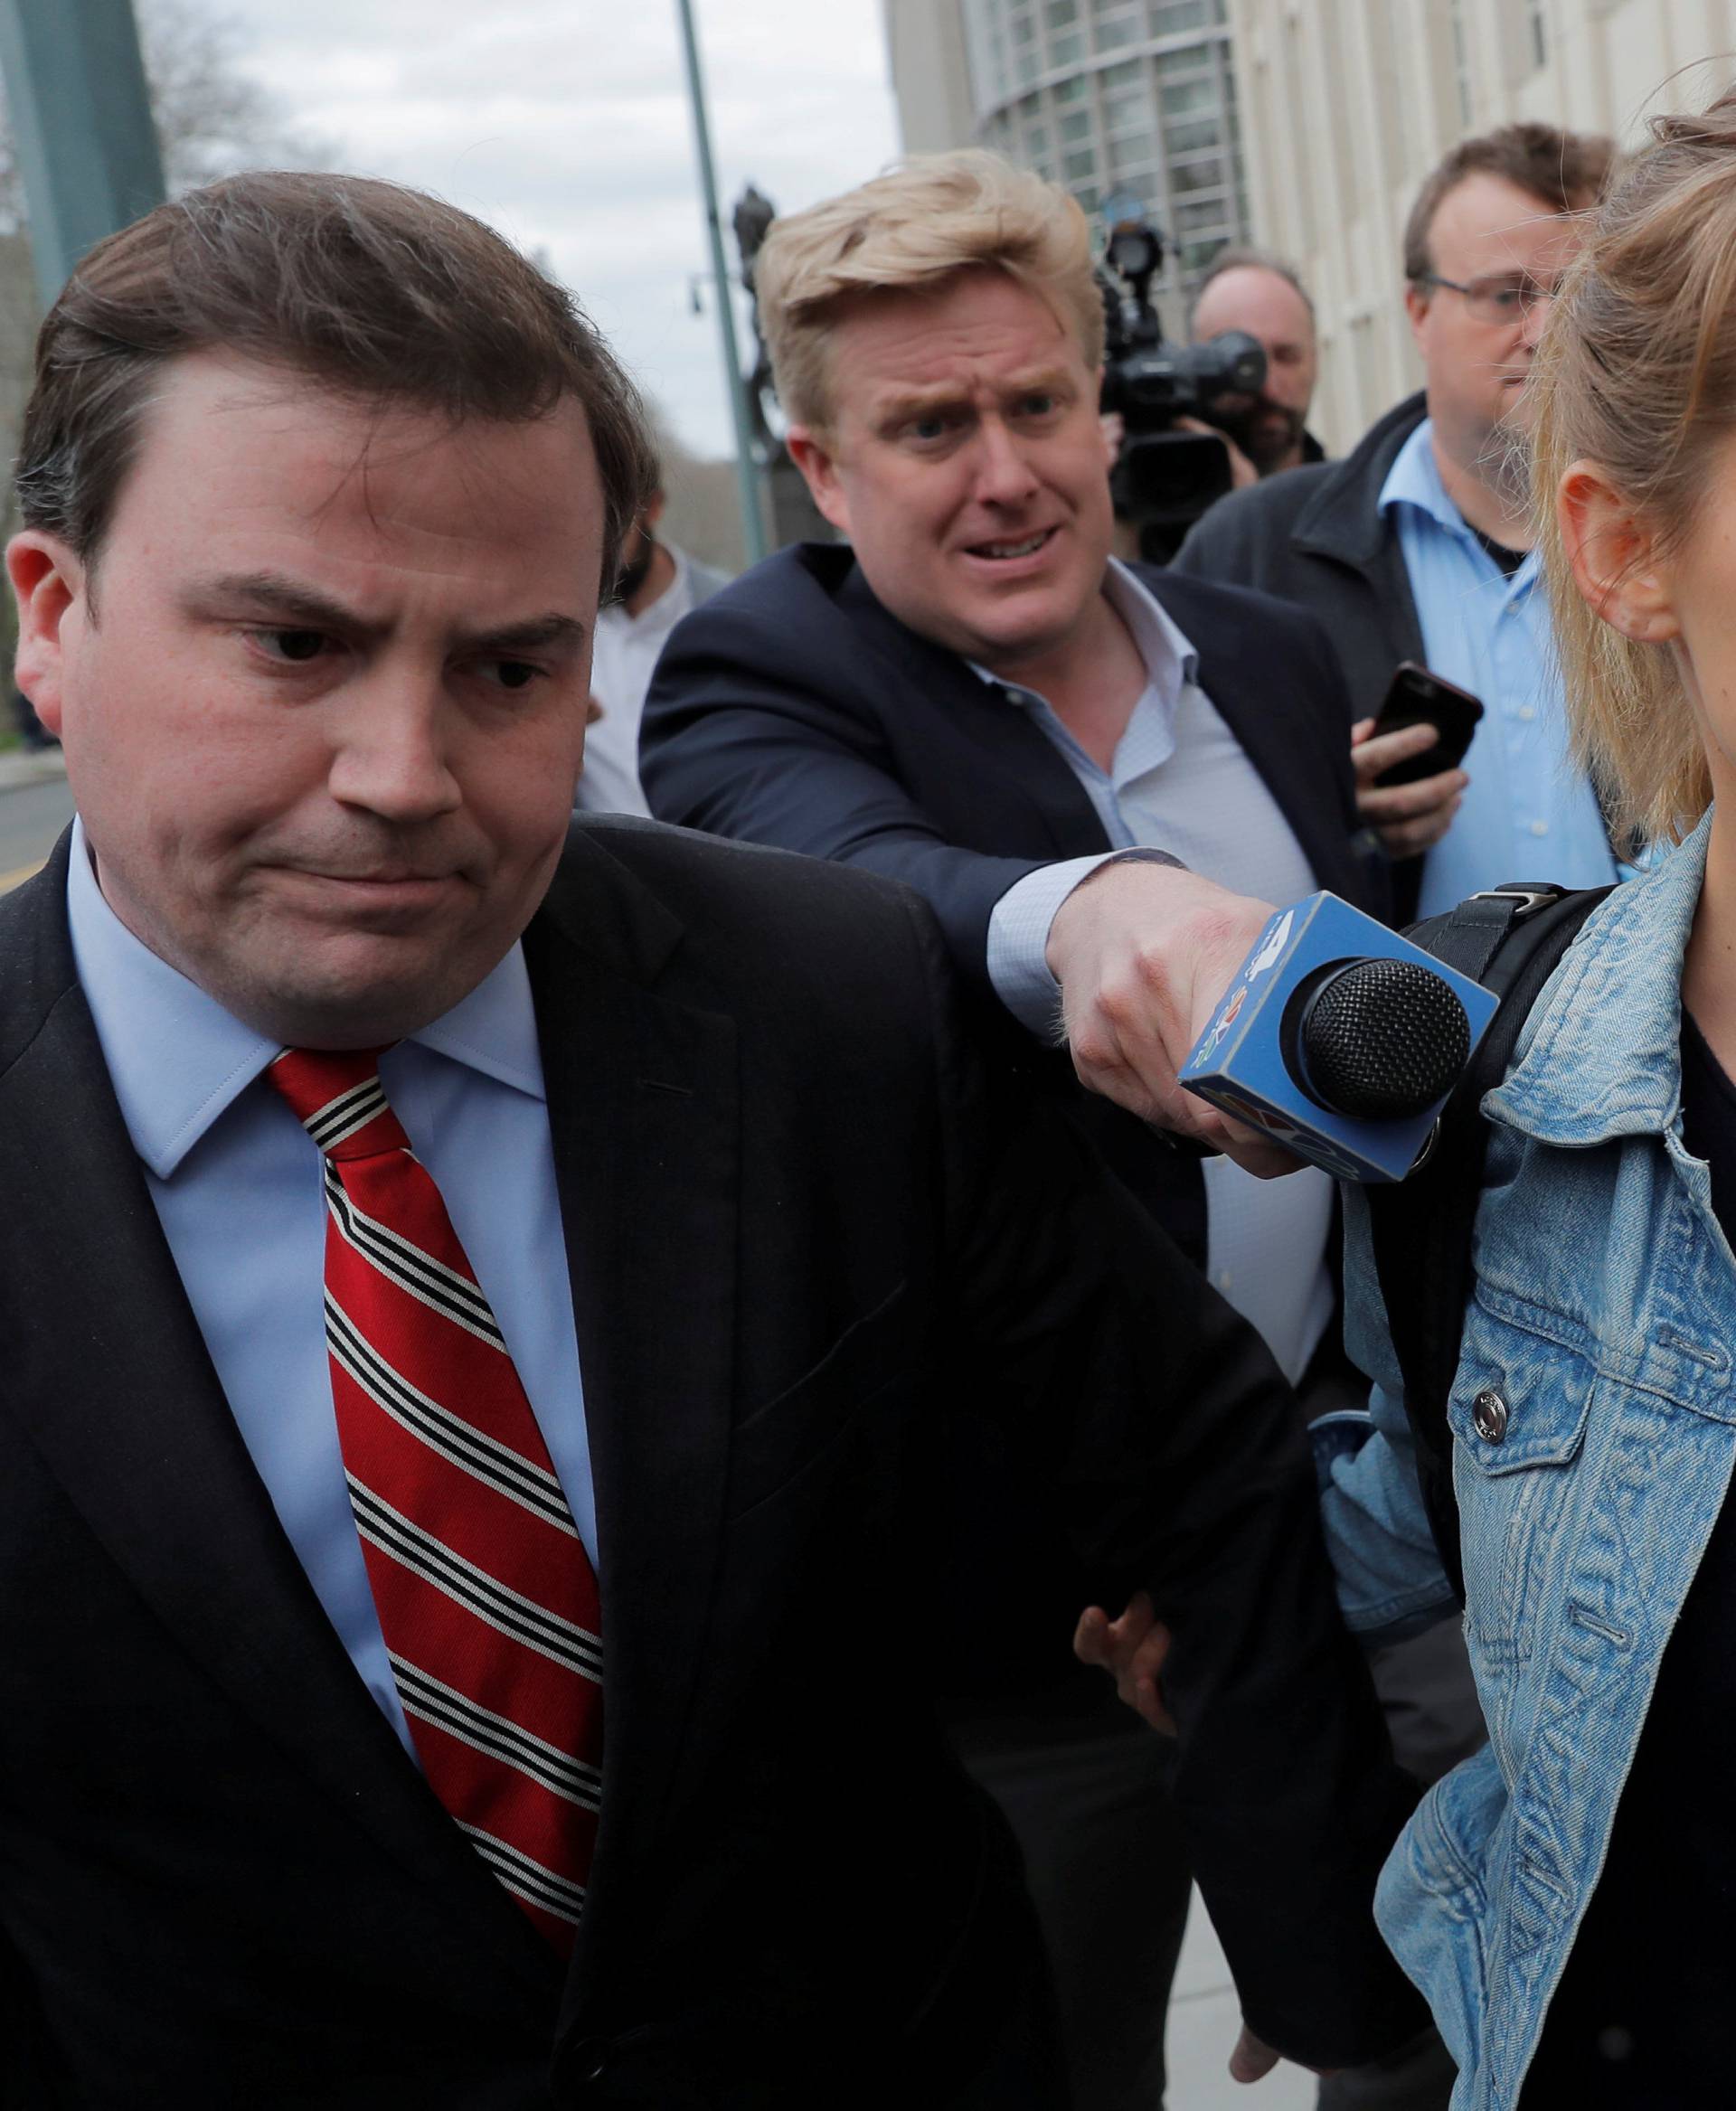 FILE PHOTO: Actress Allison Mack, known for her role in the TV series "Smallville", departs after being granted bail following being charged with sex trafficking and conspiracy in New York